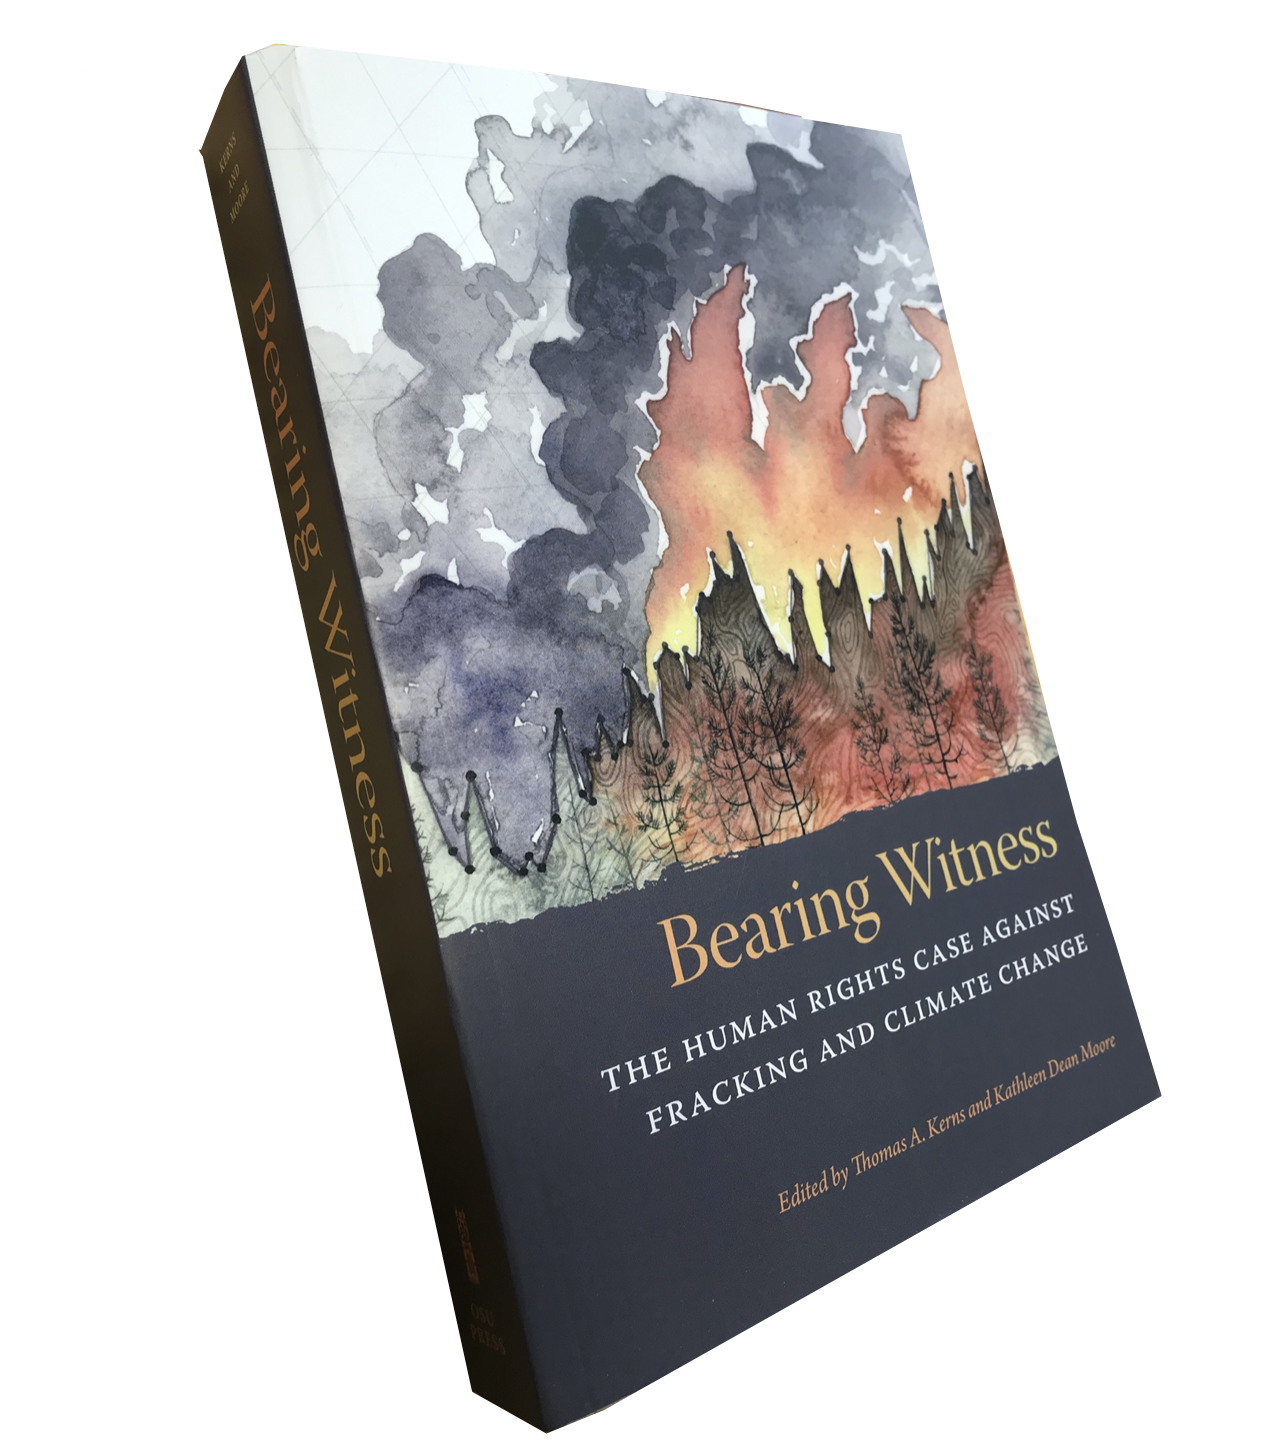 Bearing Witness: The Human Rights Case Against Fracking and Climate Change, by Thomas A. Kerns and Kathleen Dean Moore